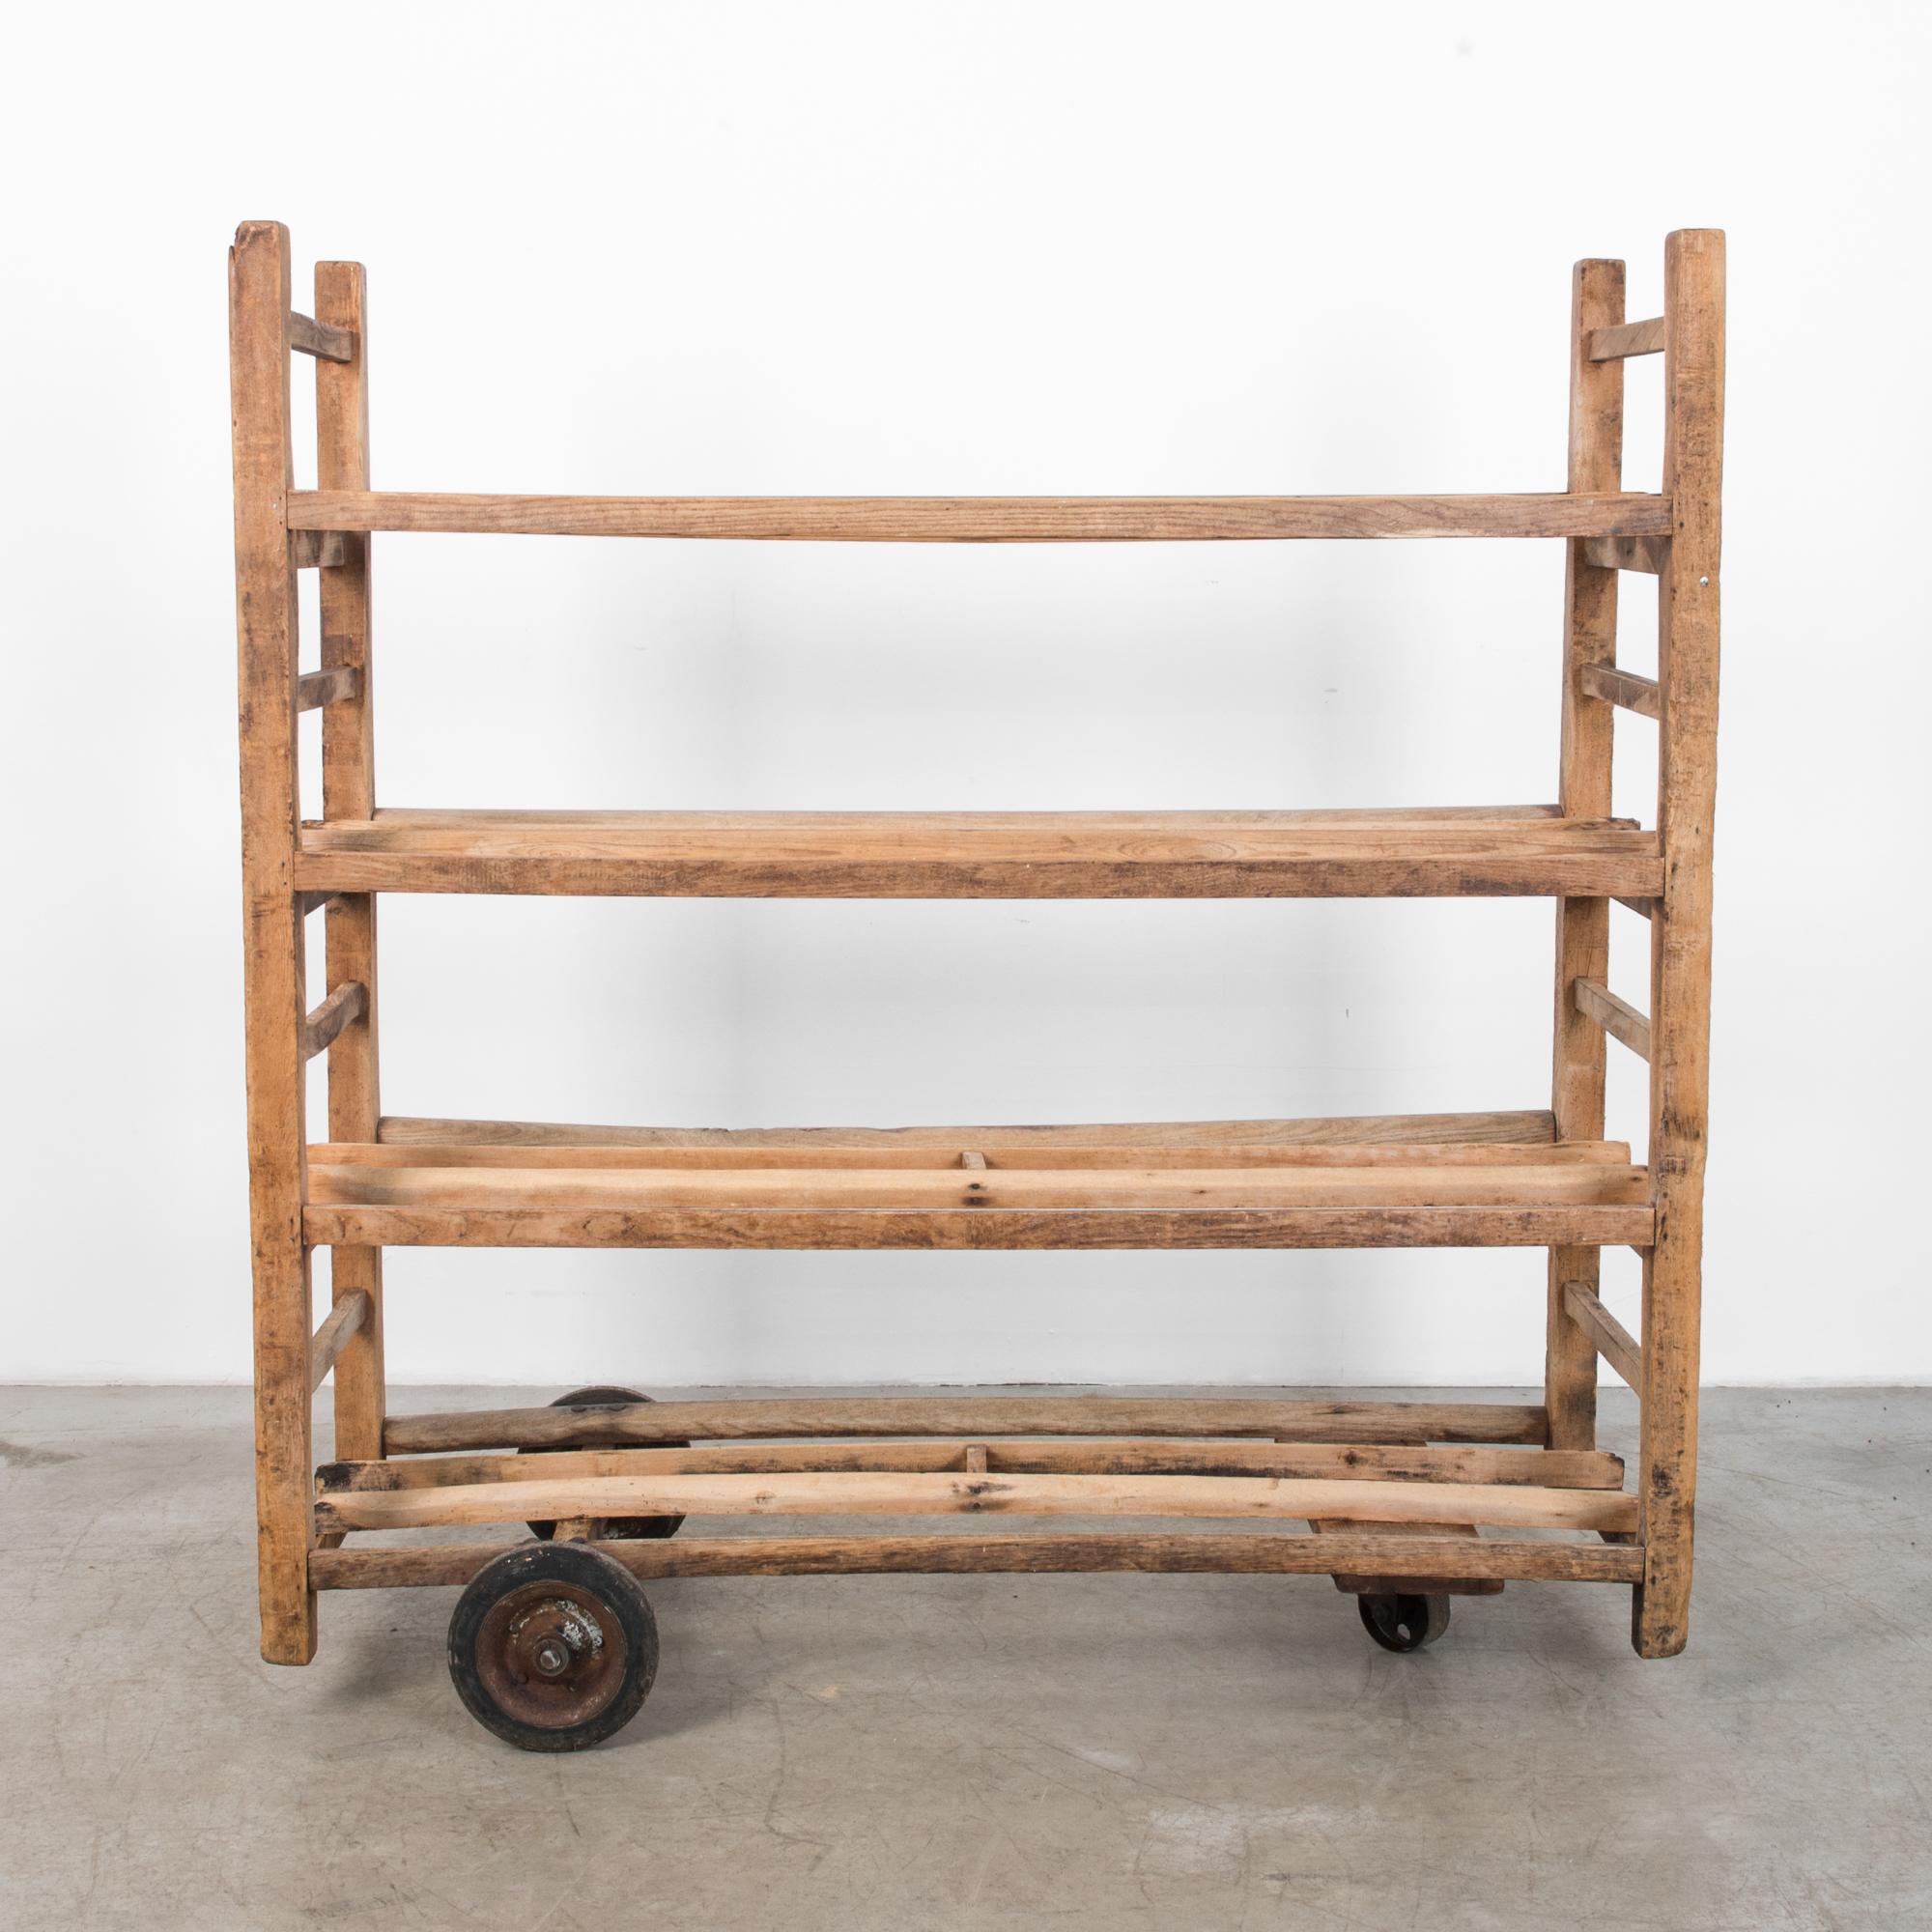 This rustic trolley was used for storage and transport in a French bakery. Great natural finish. With practical wheels and sturdy wooden construction, this piece is full of rustic European charm, cleaned and prepared for your home.